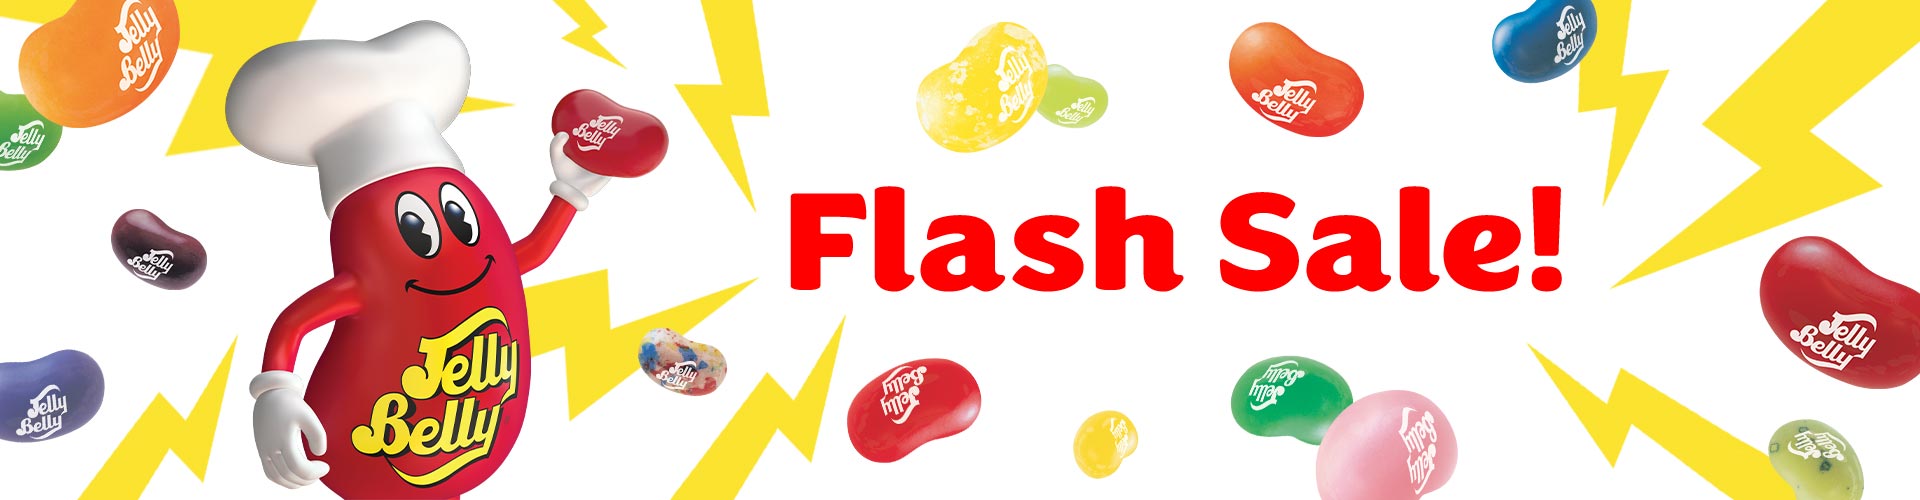 Jelly Belly Flash Sale